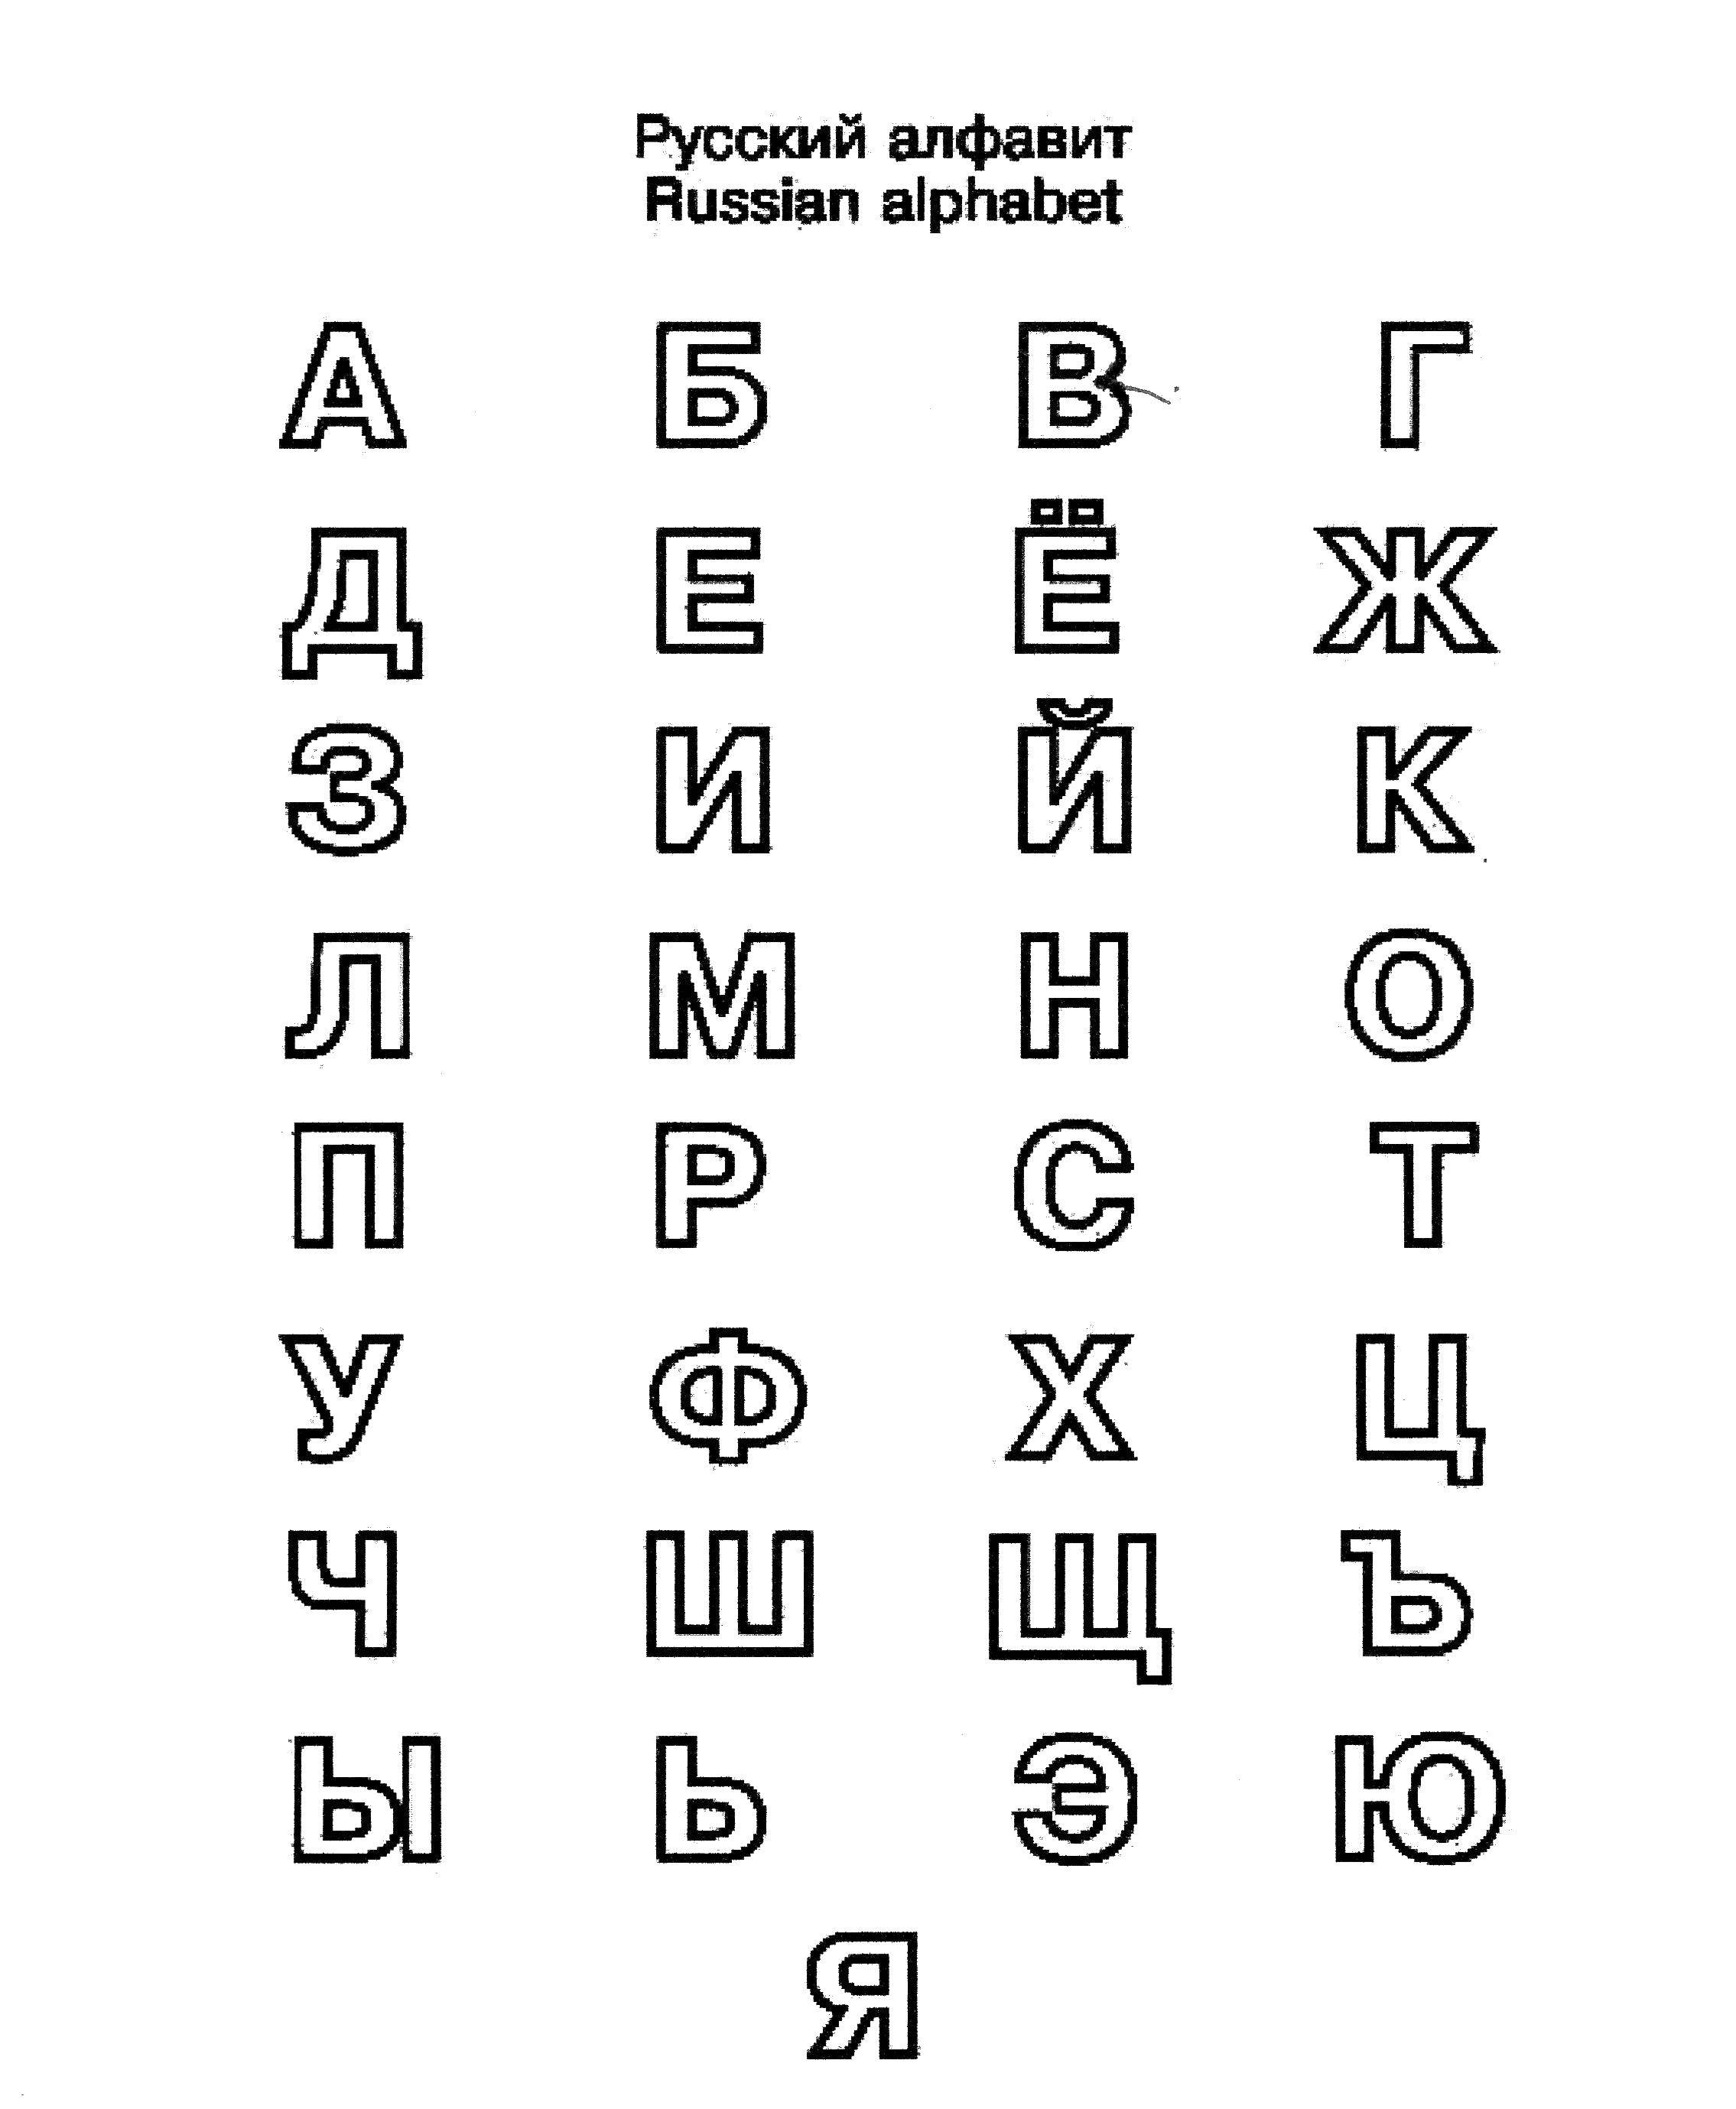 Online coloring pages russian, poisk.